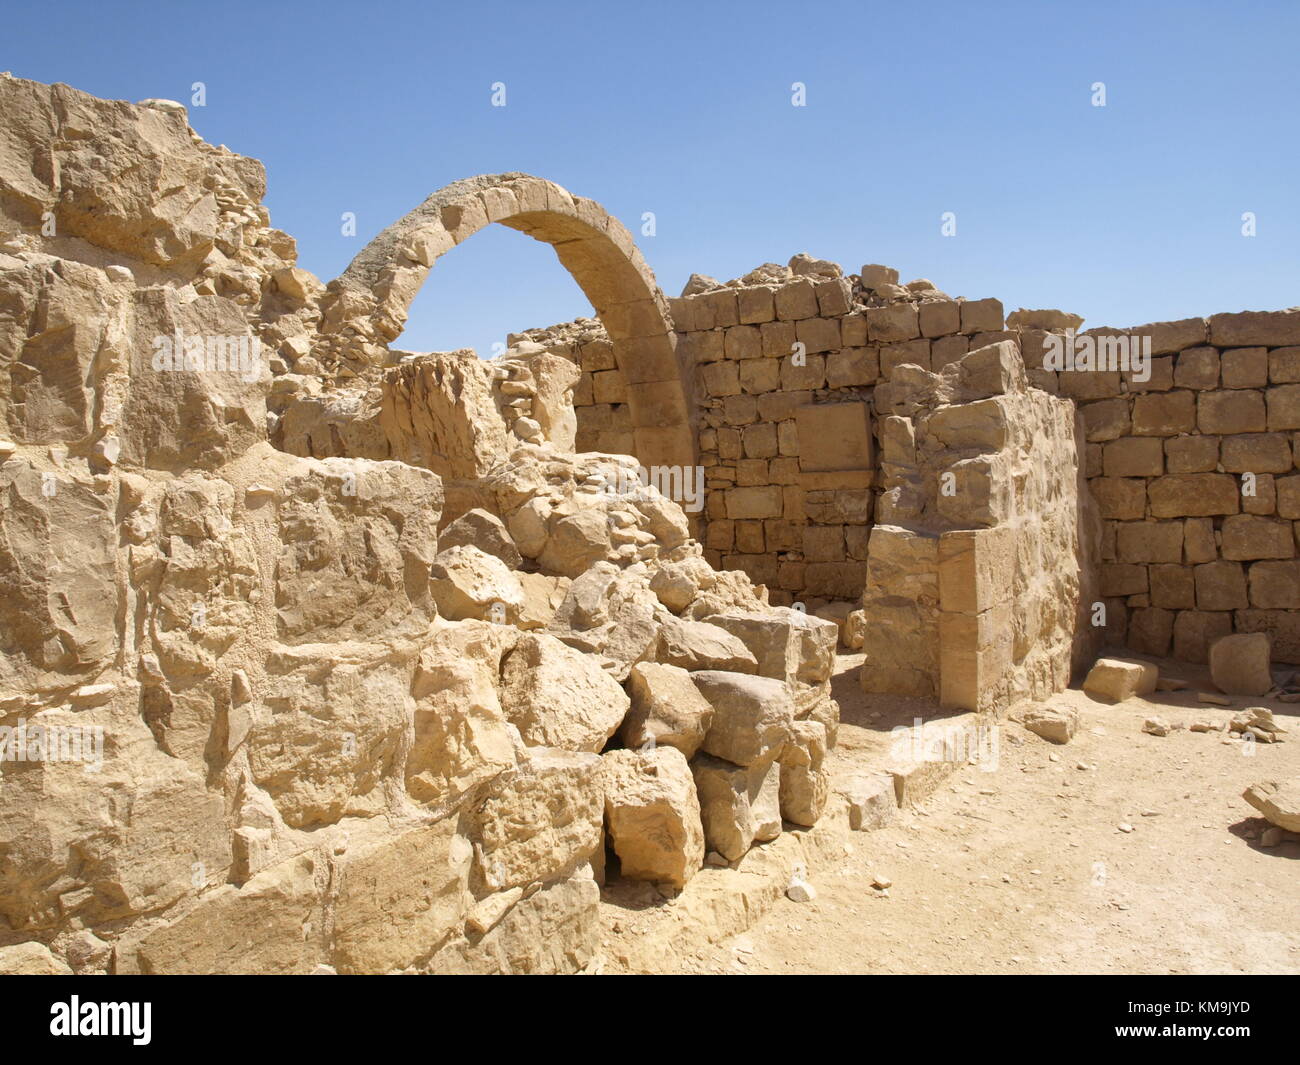 old structure in an ancient city remains in the desert Stock Photo